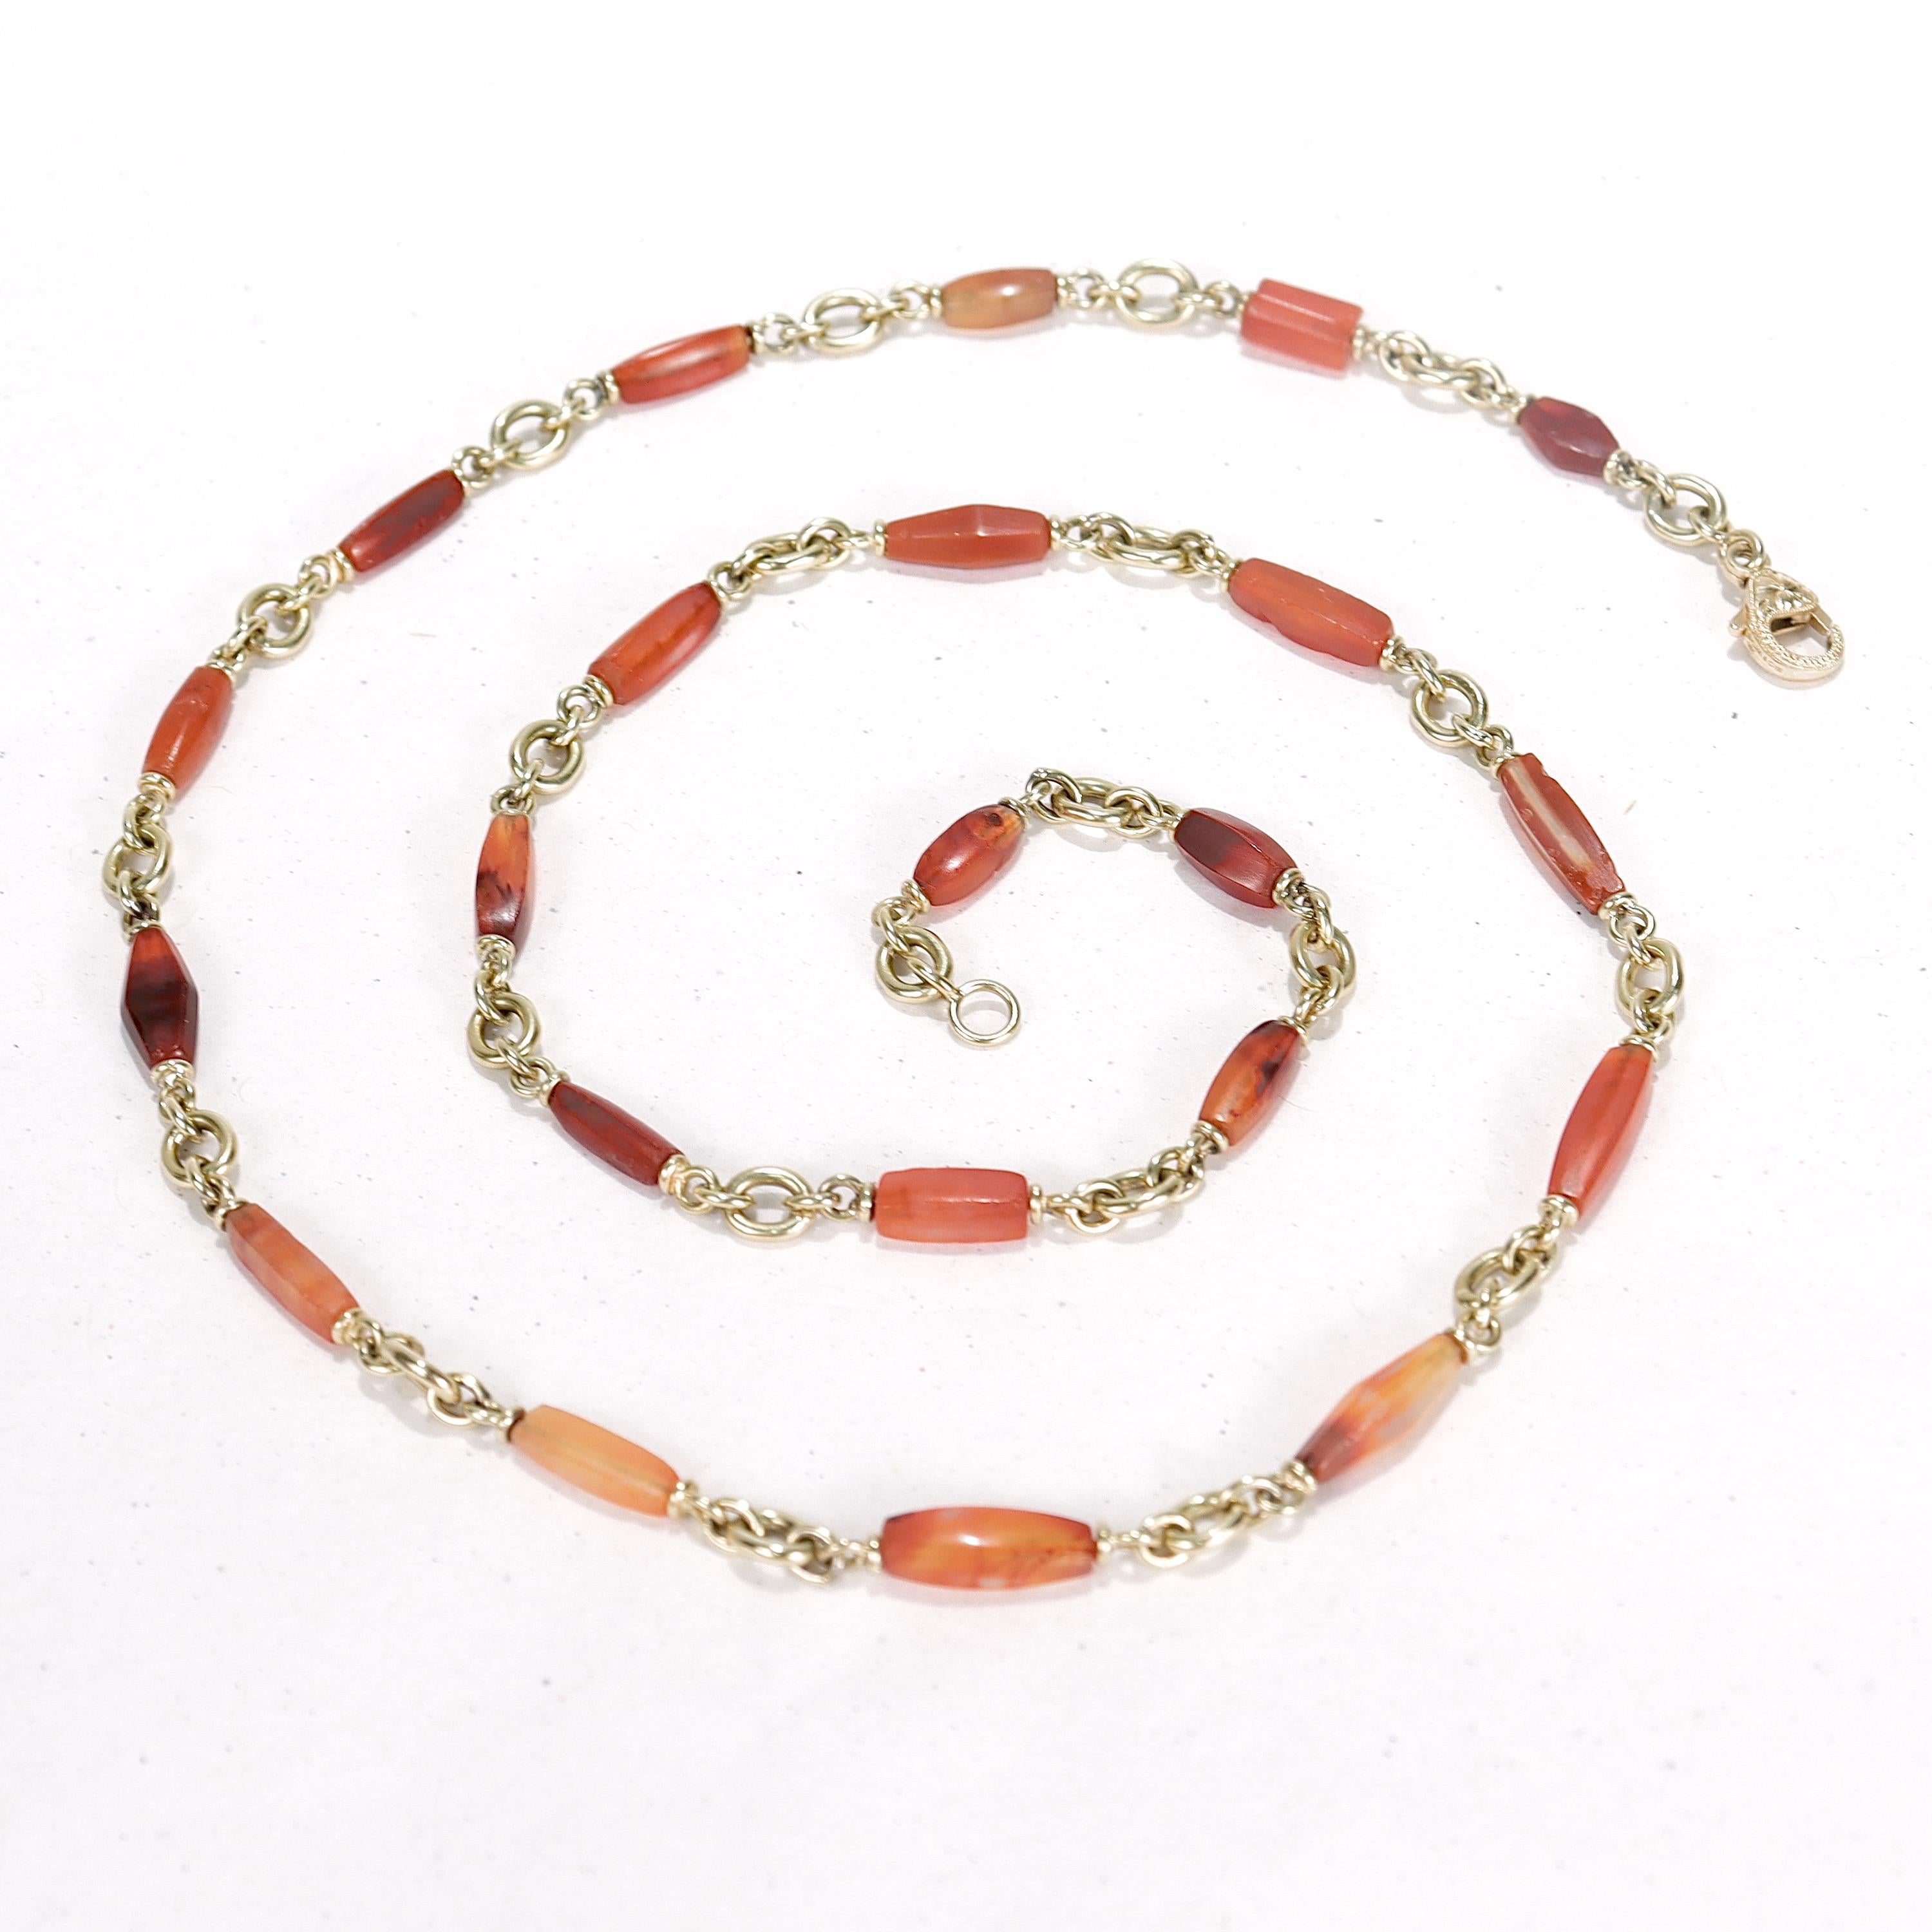 A fine gold and carnelian bead bullet chain necklace.

In 18 karat yellow gold.

With a tumbled, wheel polished carnelian gemstone beads in graduated lengths and oval gold links.

By Sylva et Cie, Sylva Yepremian's renowned Los Angeles-based jewlery